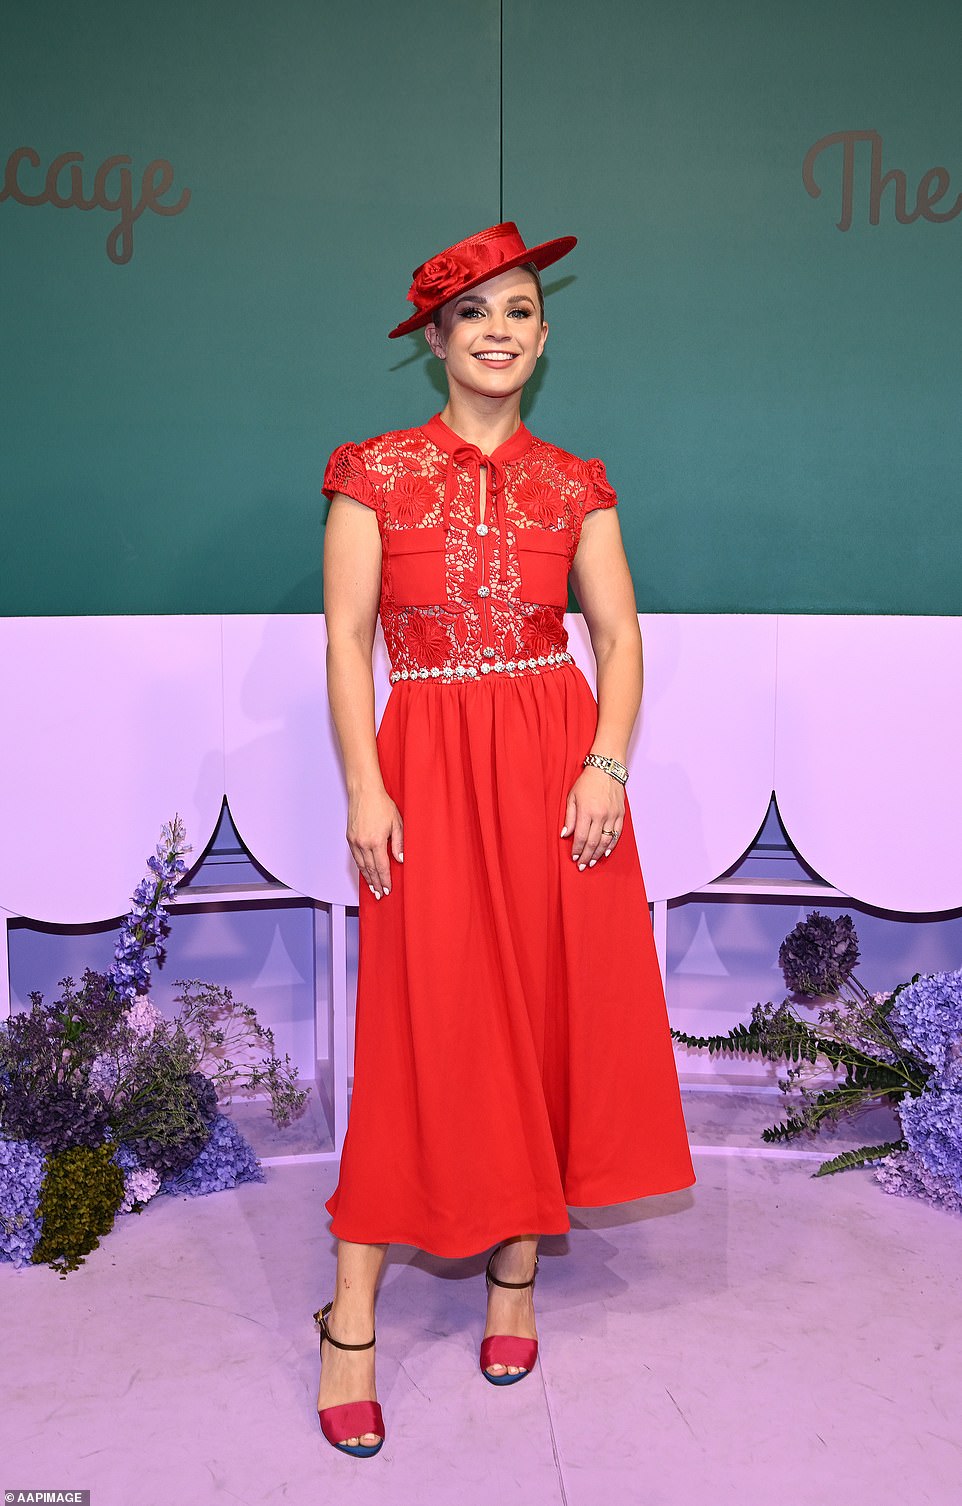 TV presenter Emma Freedman meanwhile turned heads in an all-red ensemble